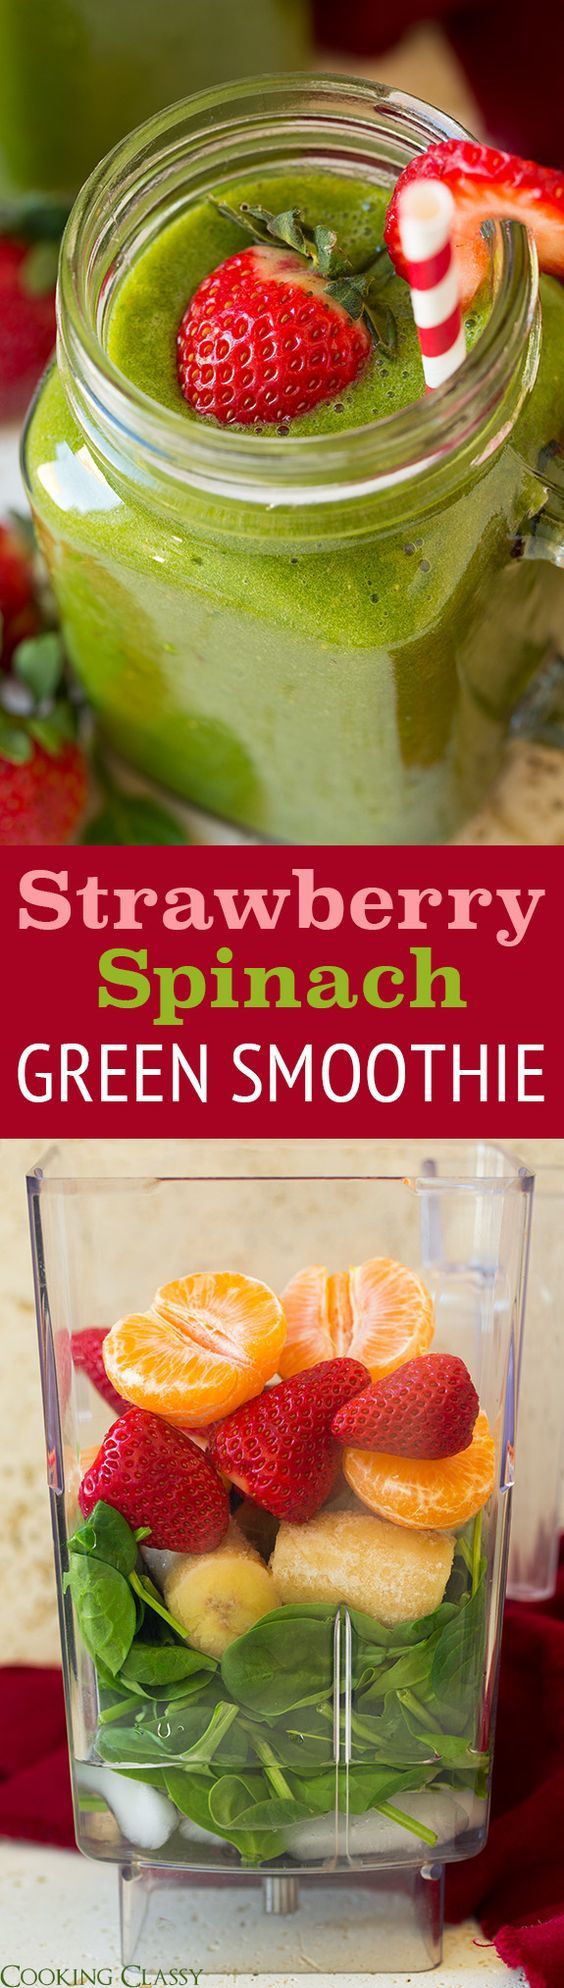 Get tips for making your favorite spinach strawberry smoothie tastier. | spinach detox smoothie | healthiest green smoothie | simple spinach smoothie | healthy fruit and vegetable smoothie recipes for weight loss #healthyeating #healthyrecipes #mealprep #nutrition #wellness #keepingfit #healthylife #healthymeals #nobake #natural